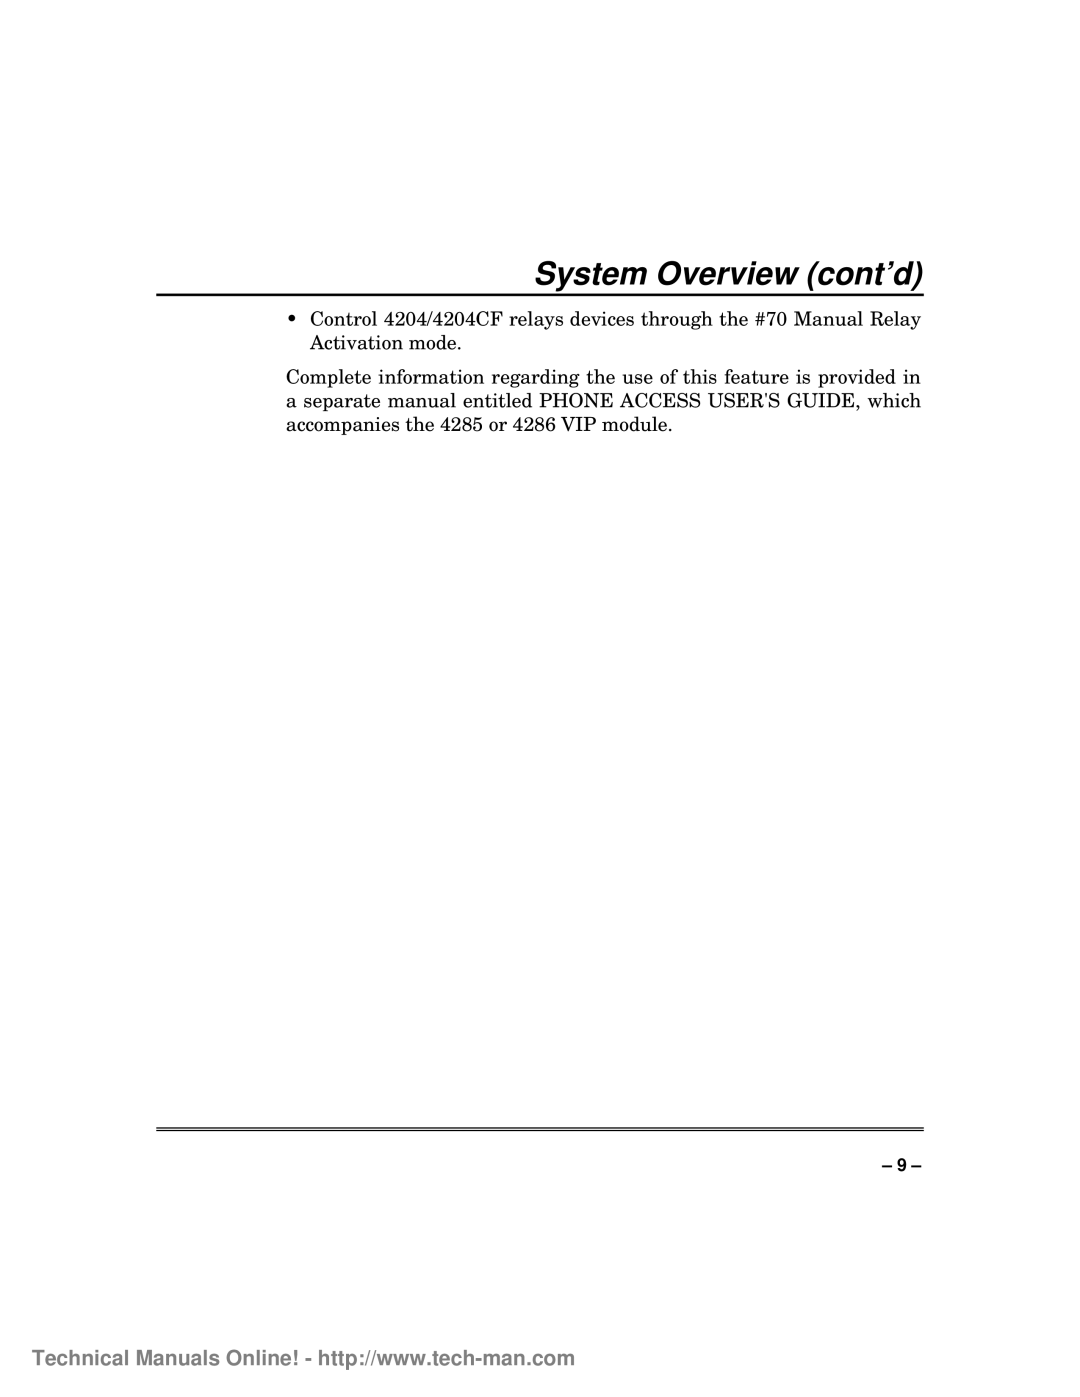 First Alert FA1600C/CA/CB, fa1600c technical manual System Overview cont’d 